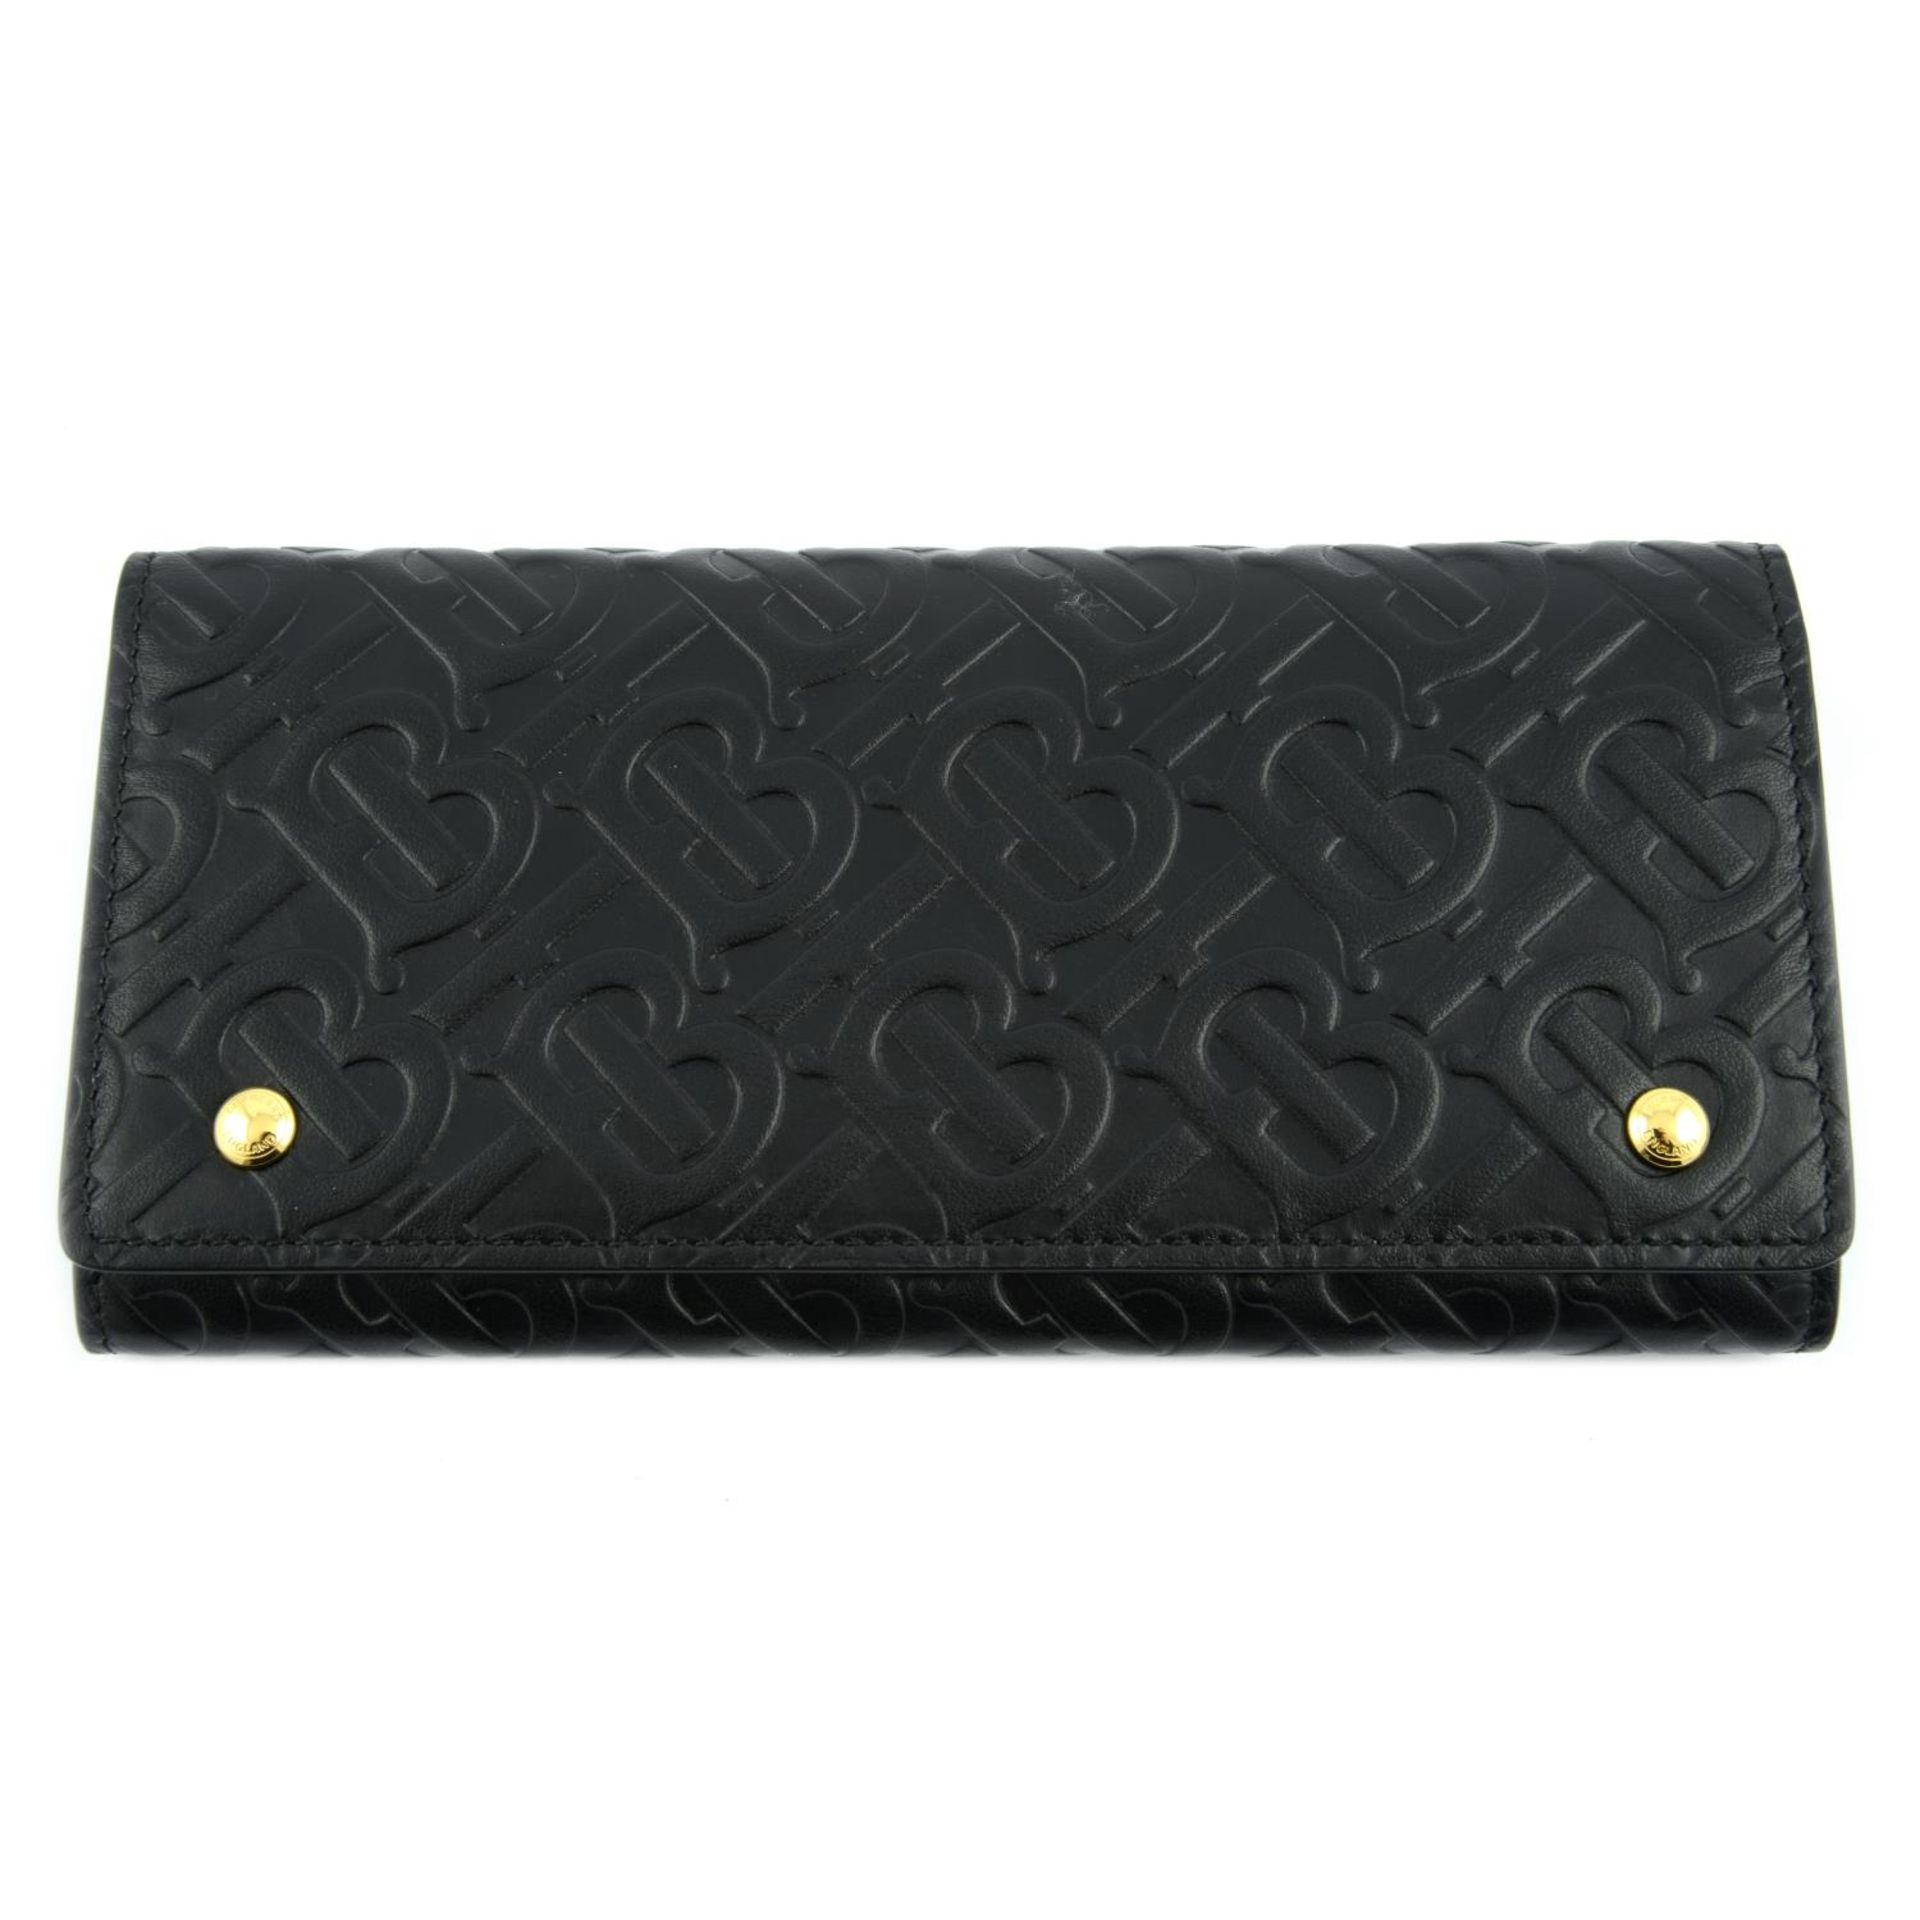 BURBERRY - a black leather monogram continental wallet.